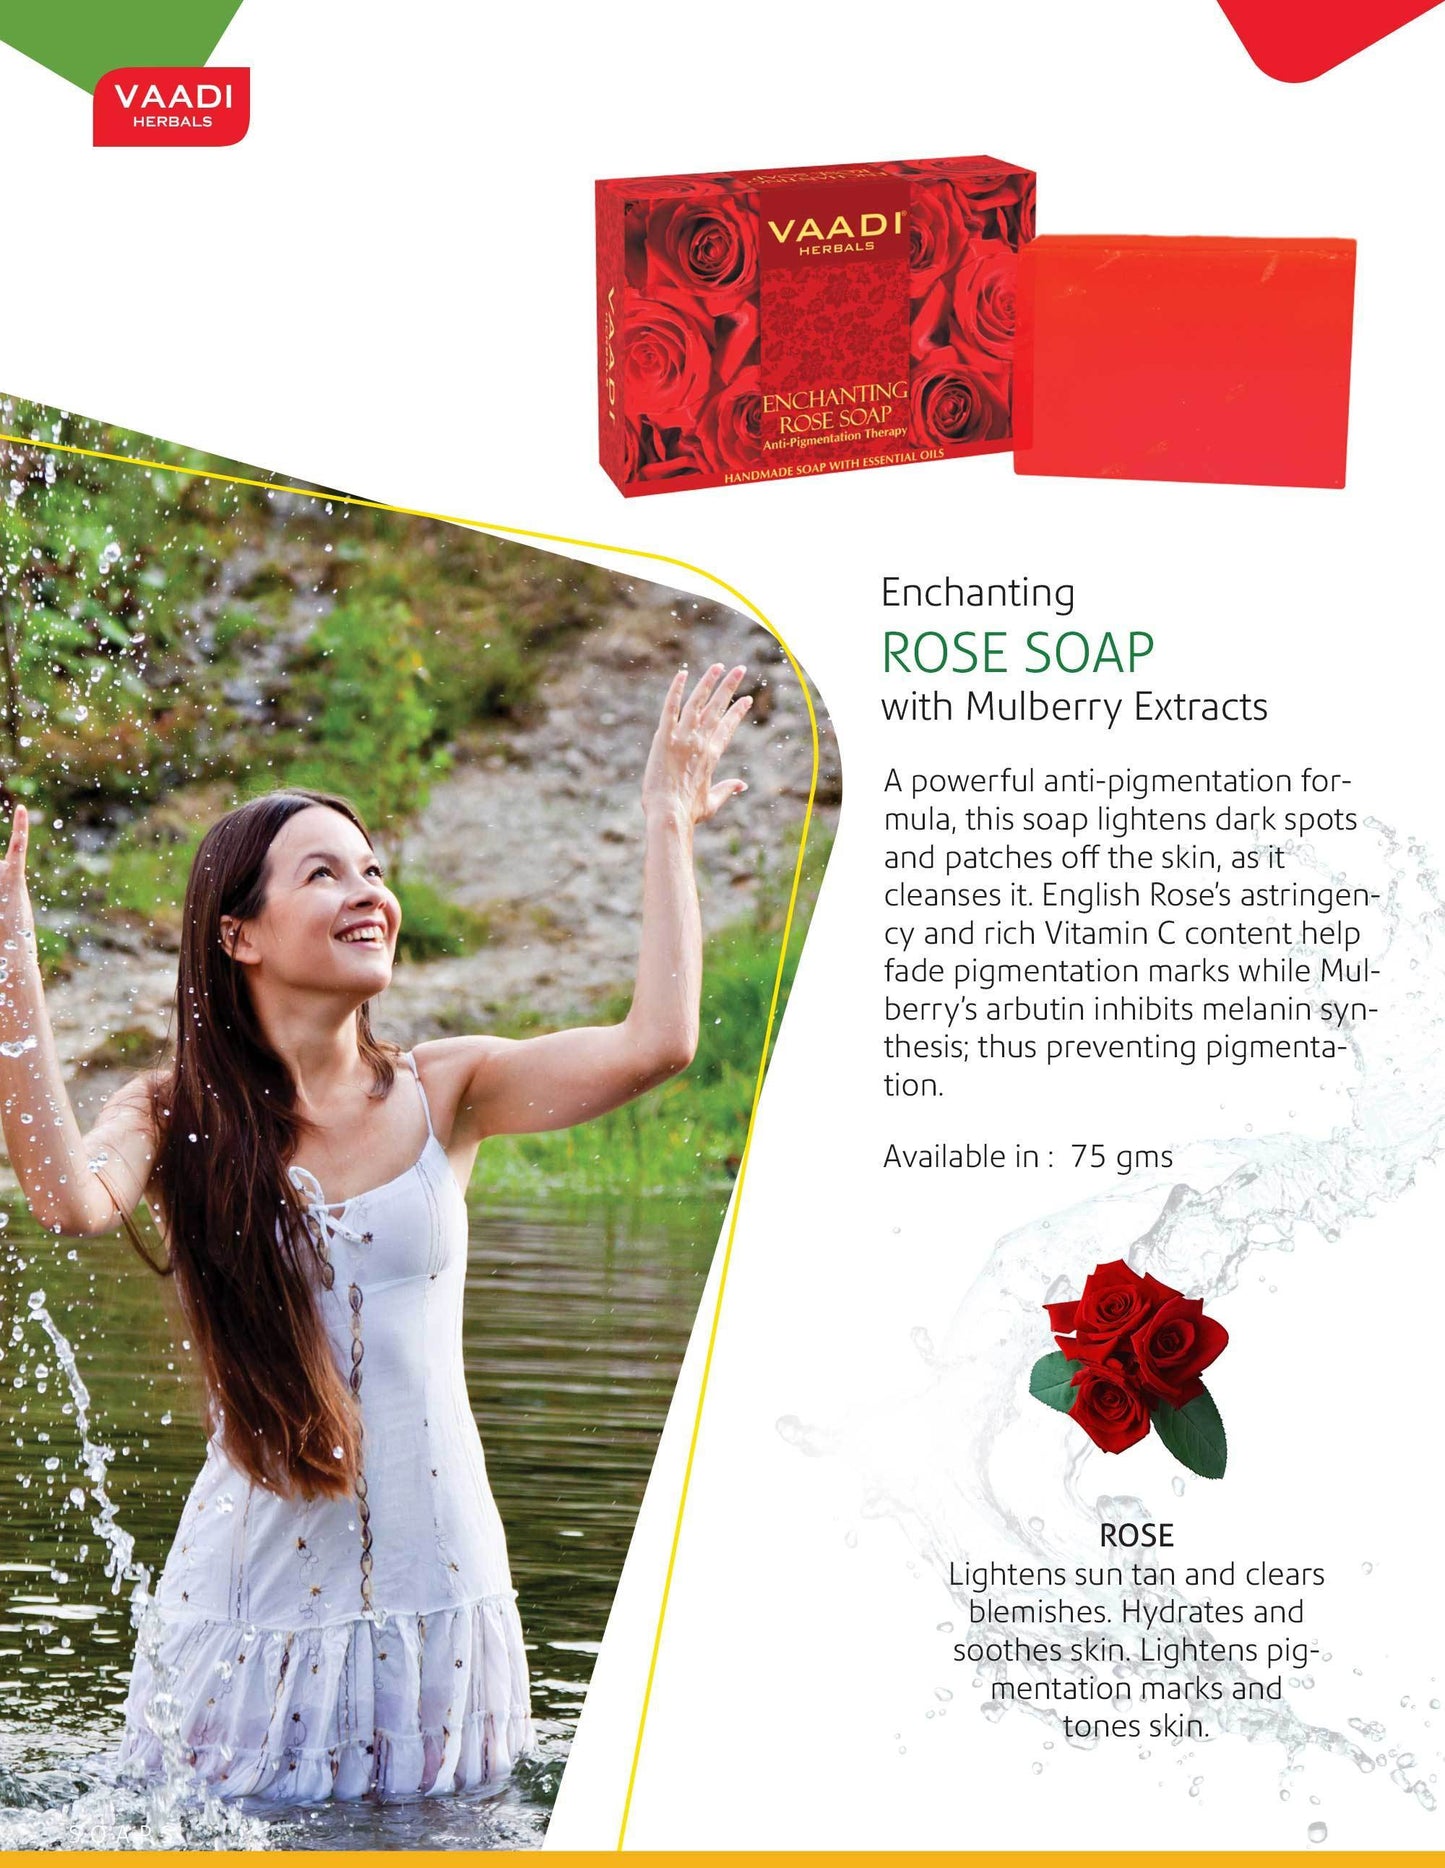 Enchanting Organic Rose Soap with Mulberry Extract - Anti Pigmentation Therapy - Lightens Dark Spots & Patches (75 gms/2.7 oz)